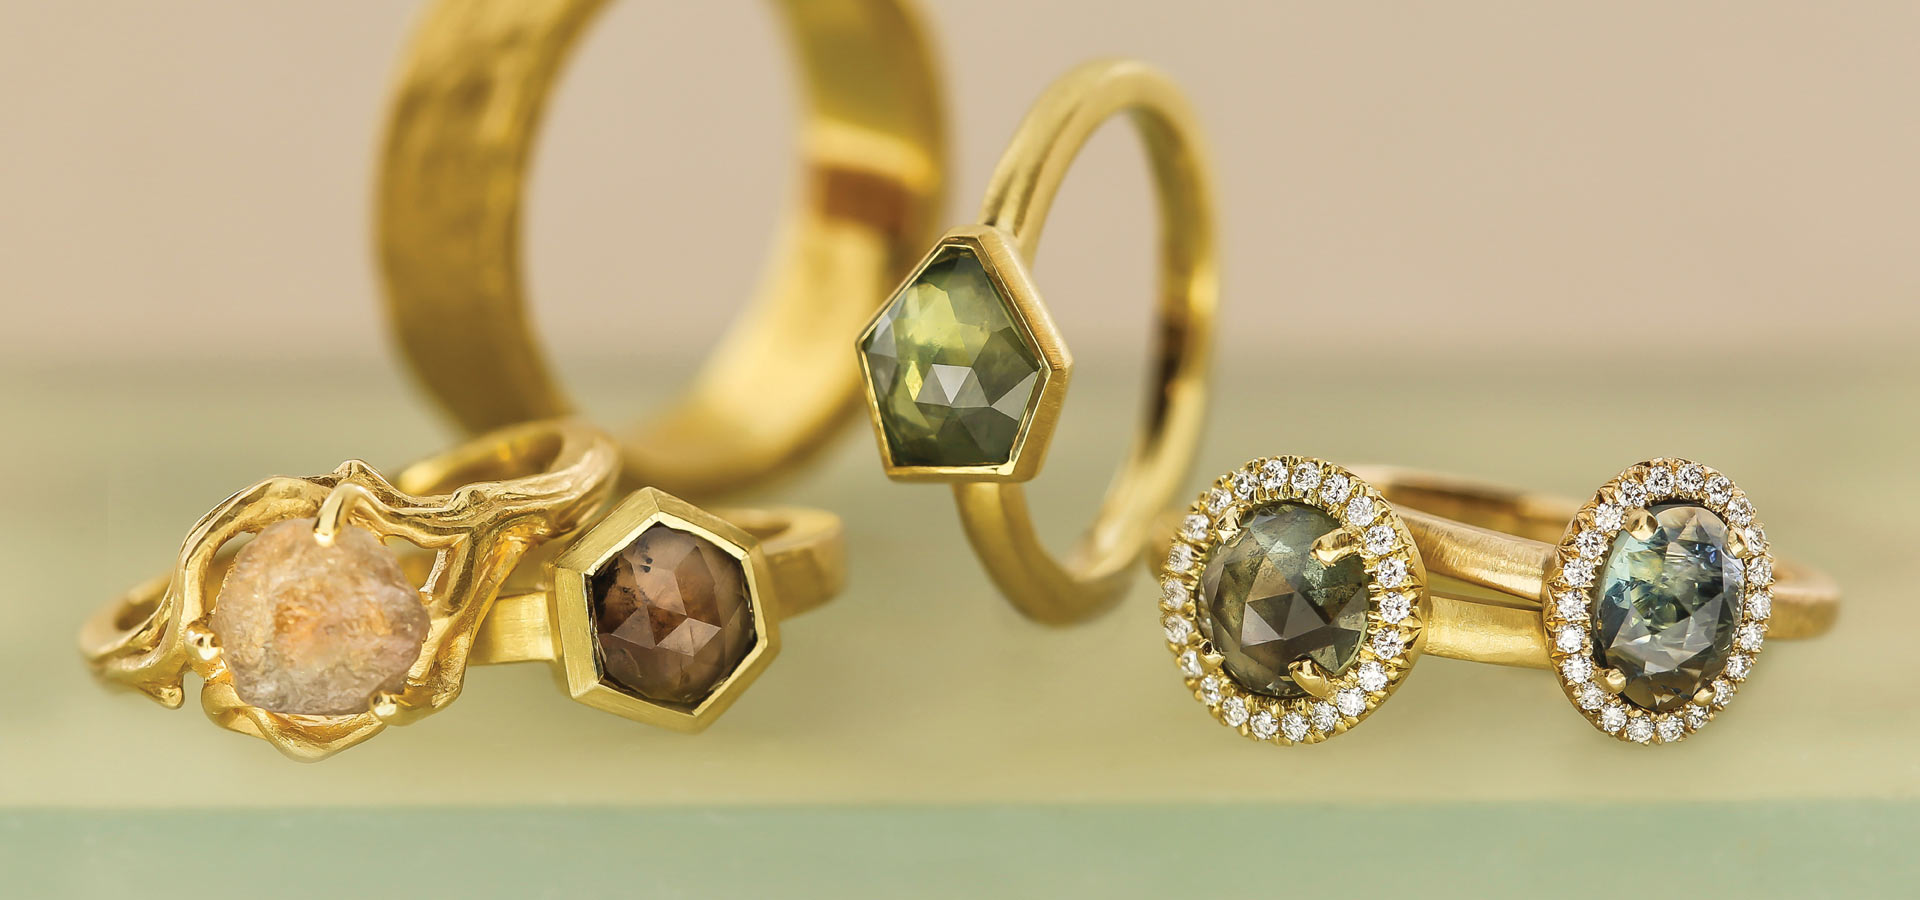 Design Your Own Engagement Ring & Custom Jewelry | Green Lake Jewelry